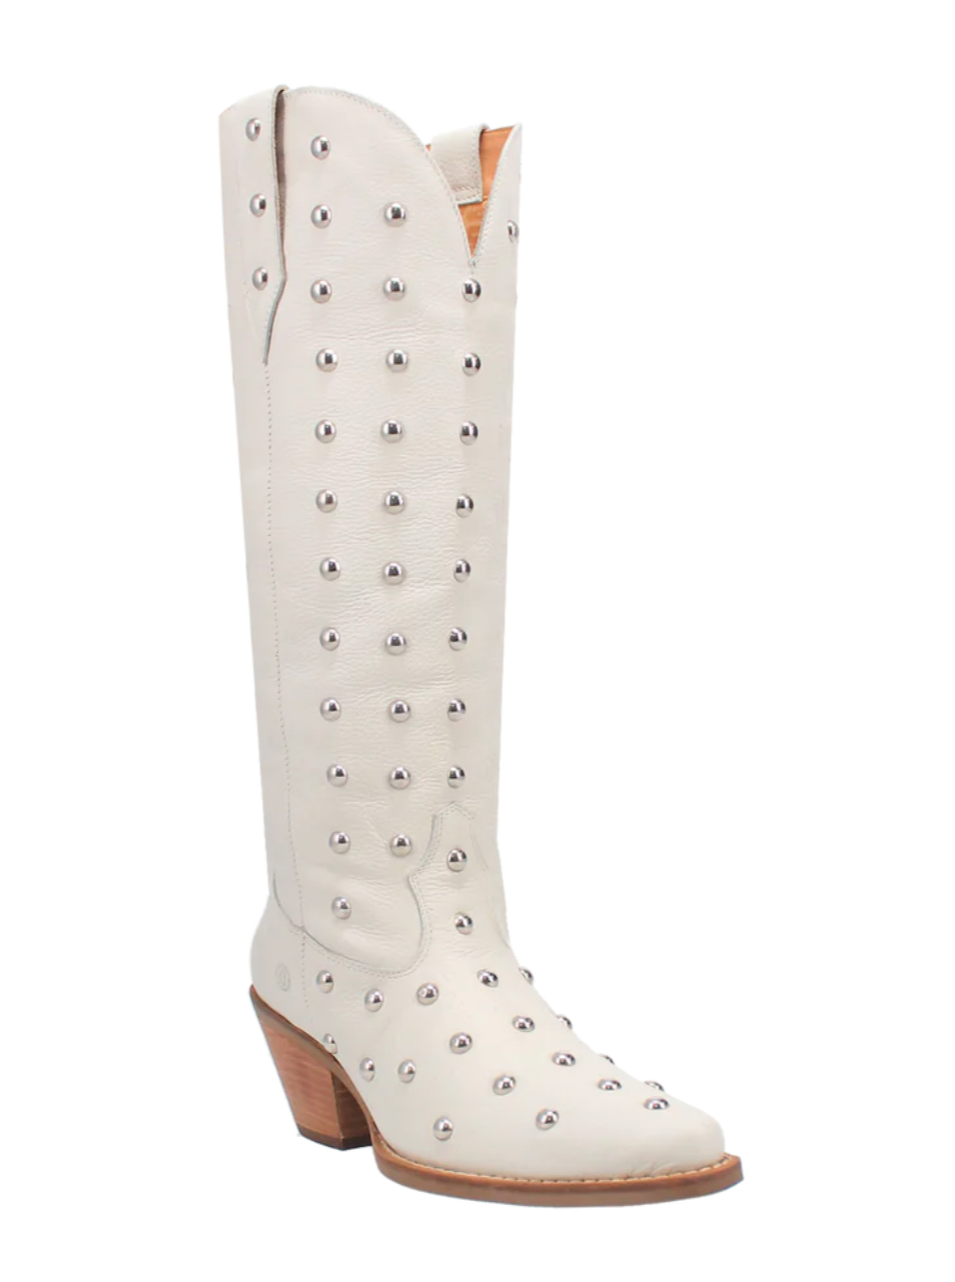 Broadway Bunny Studded Boots